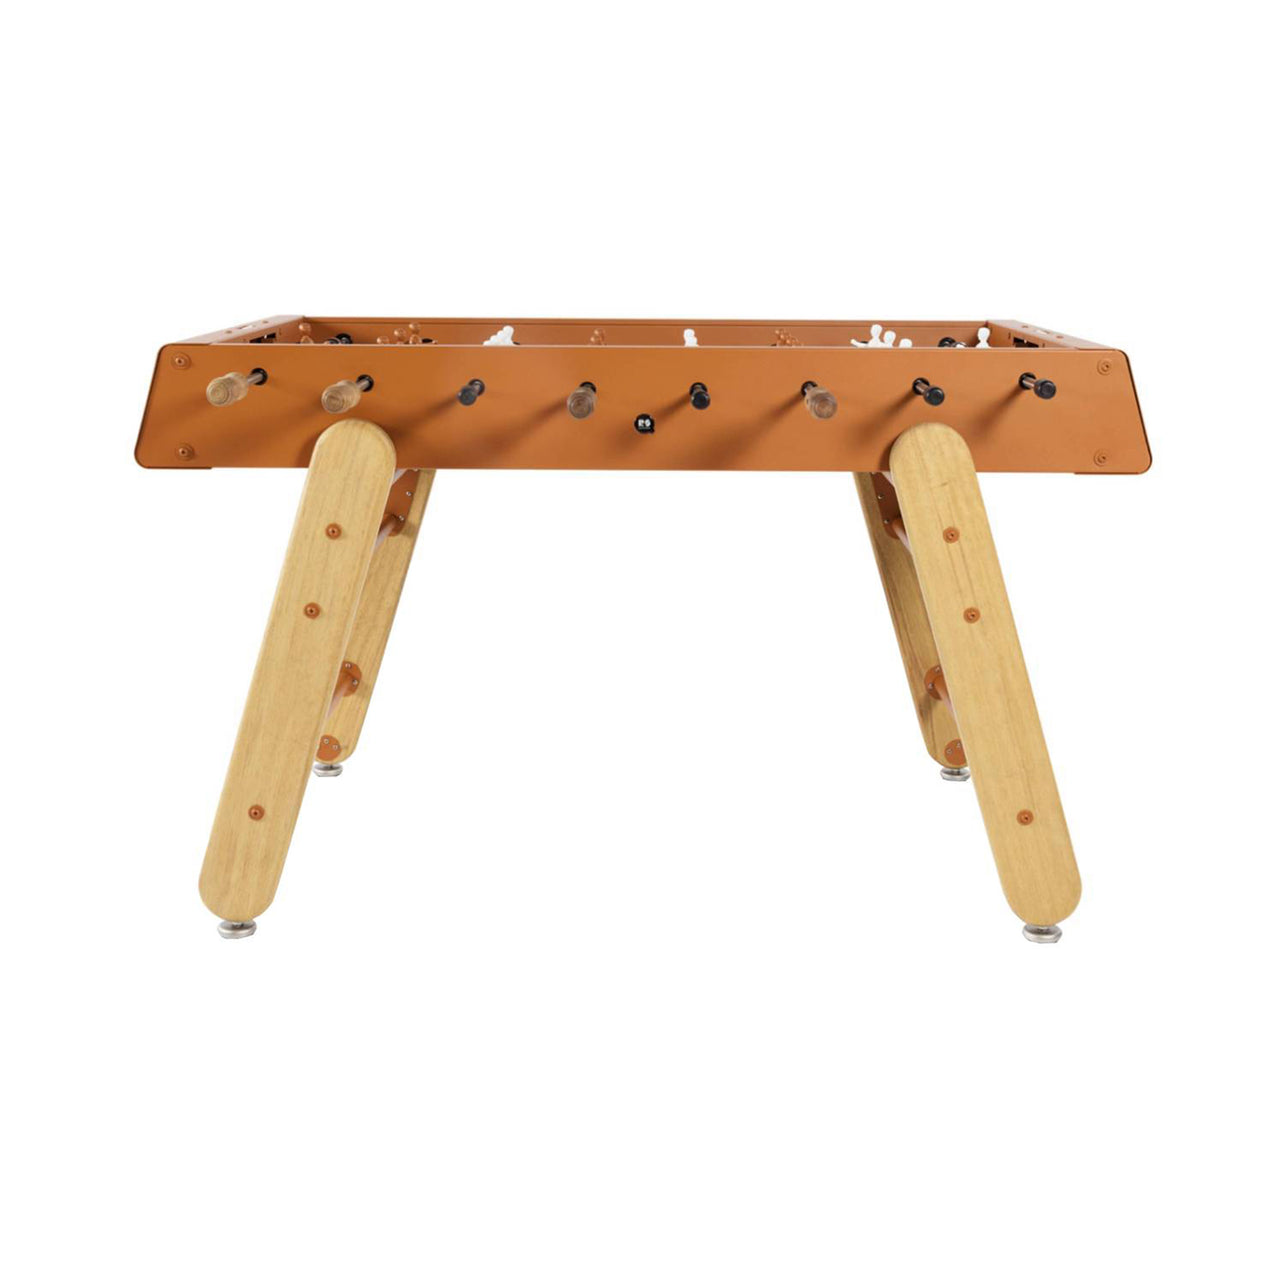 RS4 Home Football Table: Terracotta